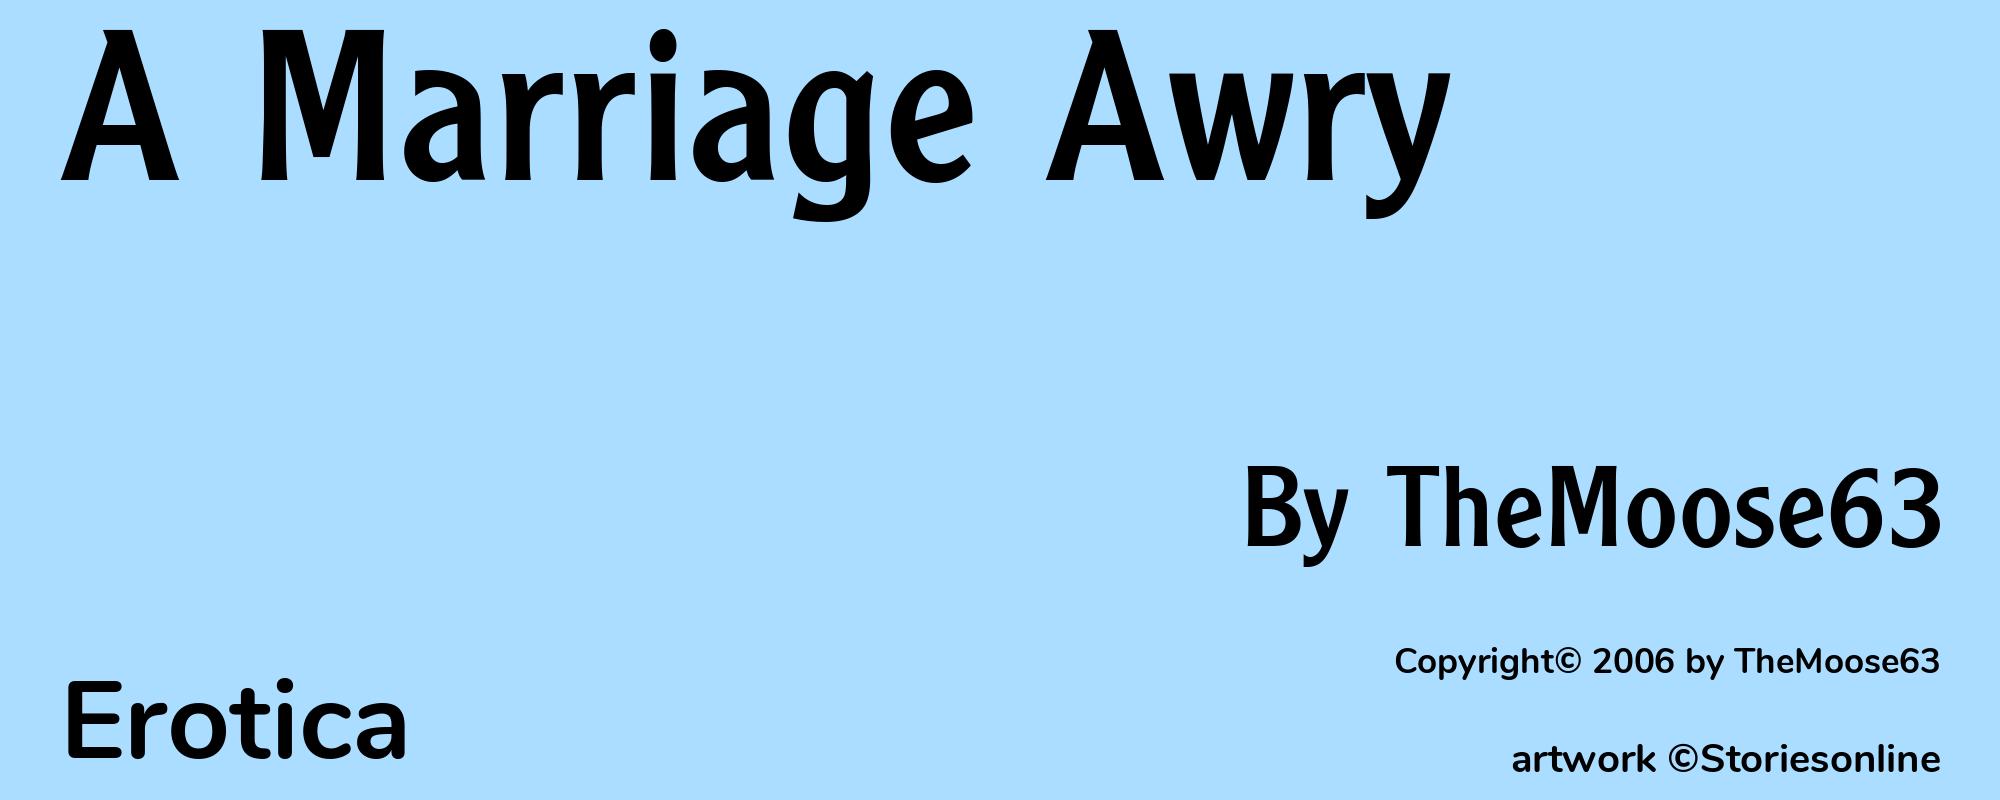 A Marriage Awry - Cover